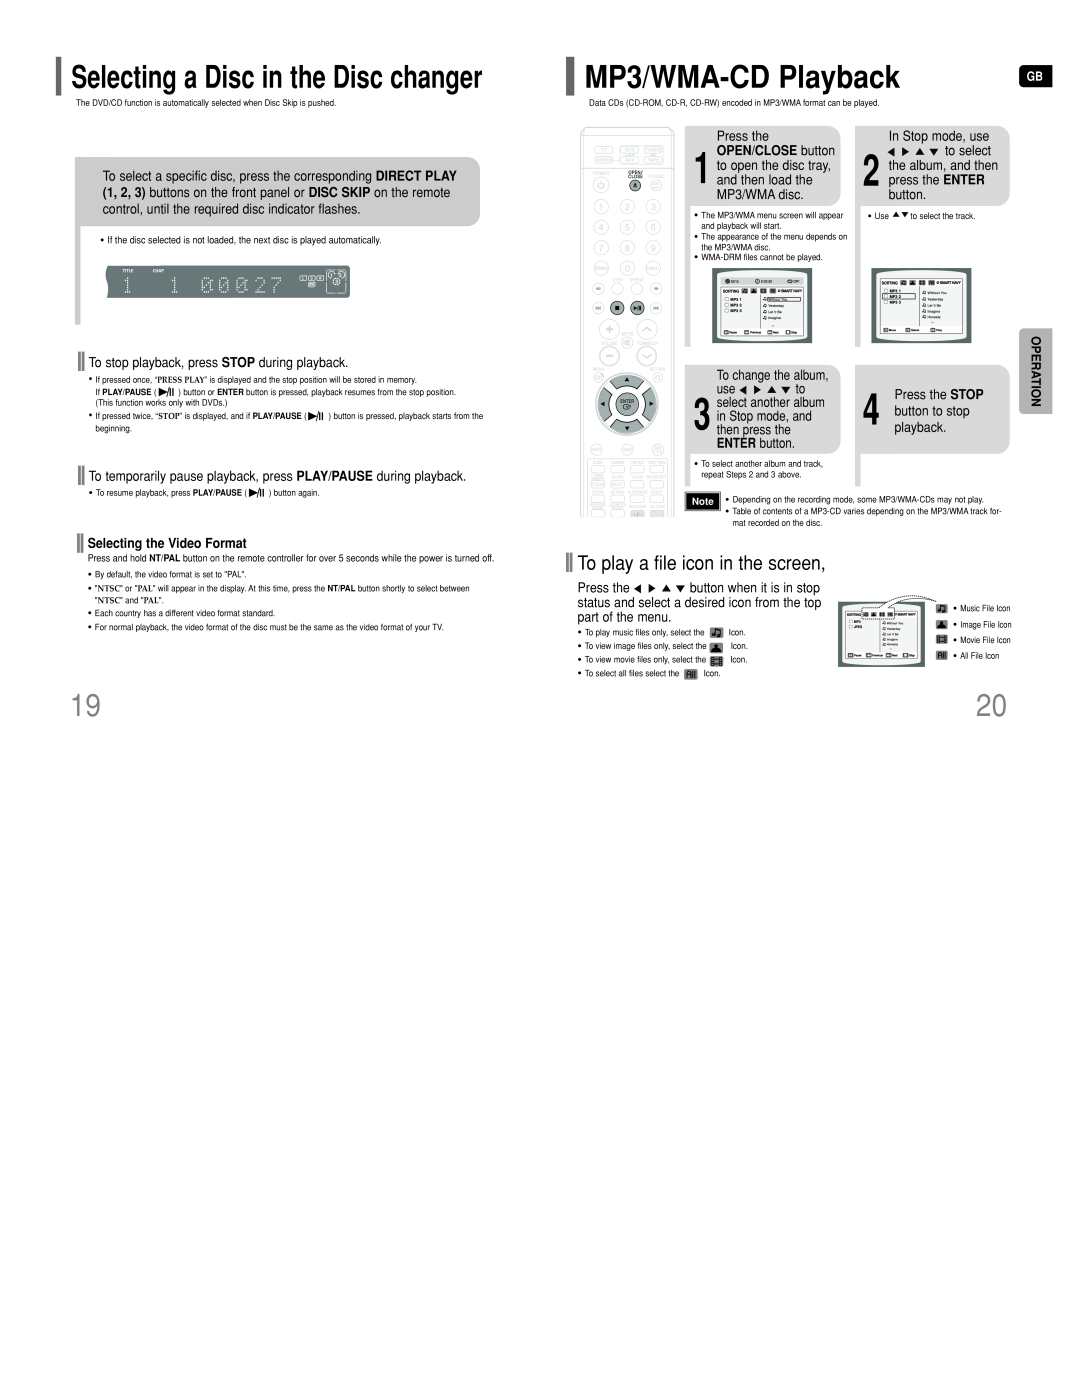 Samsung HT-DT79 instruction manual MP3/WMA-CDPlayback, To play a file icon in the screen, Selecting the Video Format 